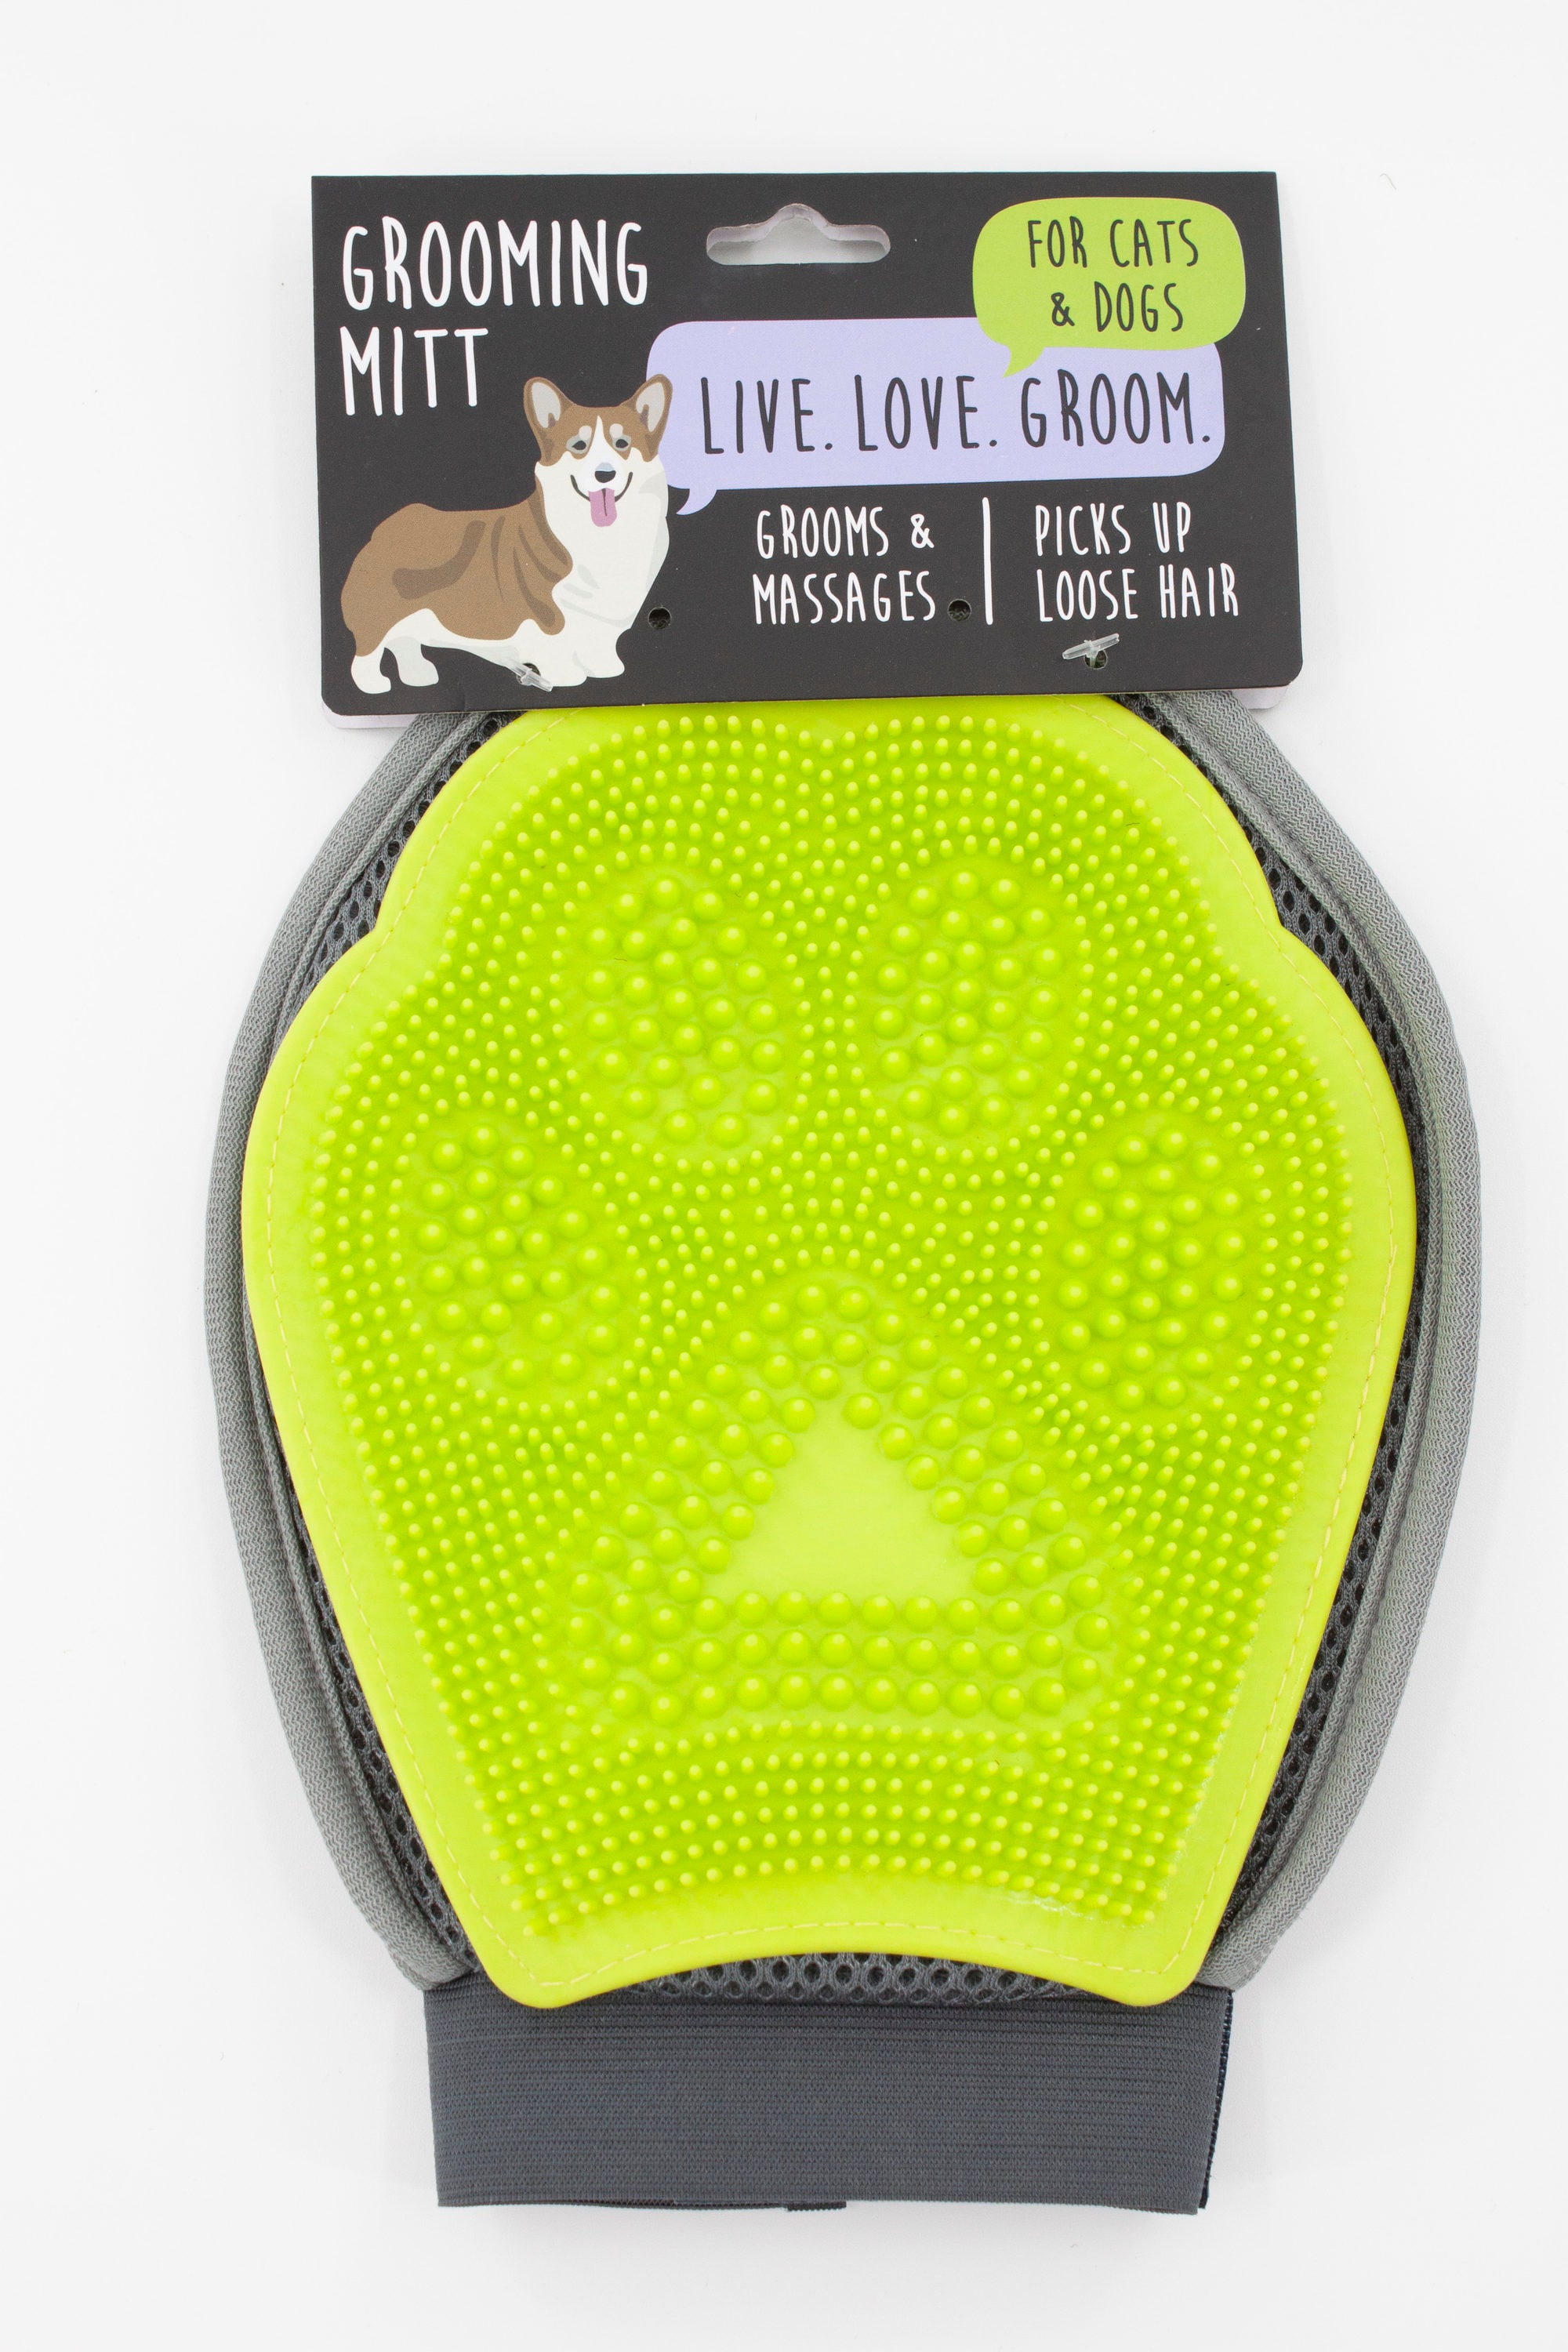 Soft Bristle Dog Brush for Short Haired Cats or Dogs - Firm Bristles to Remove Dust, Dirt, and Loose Fur - Hook and Rubber Handle